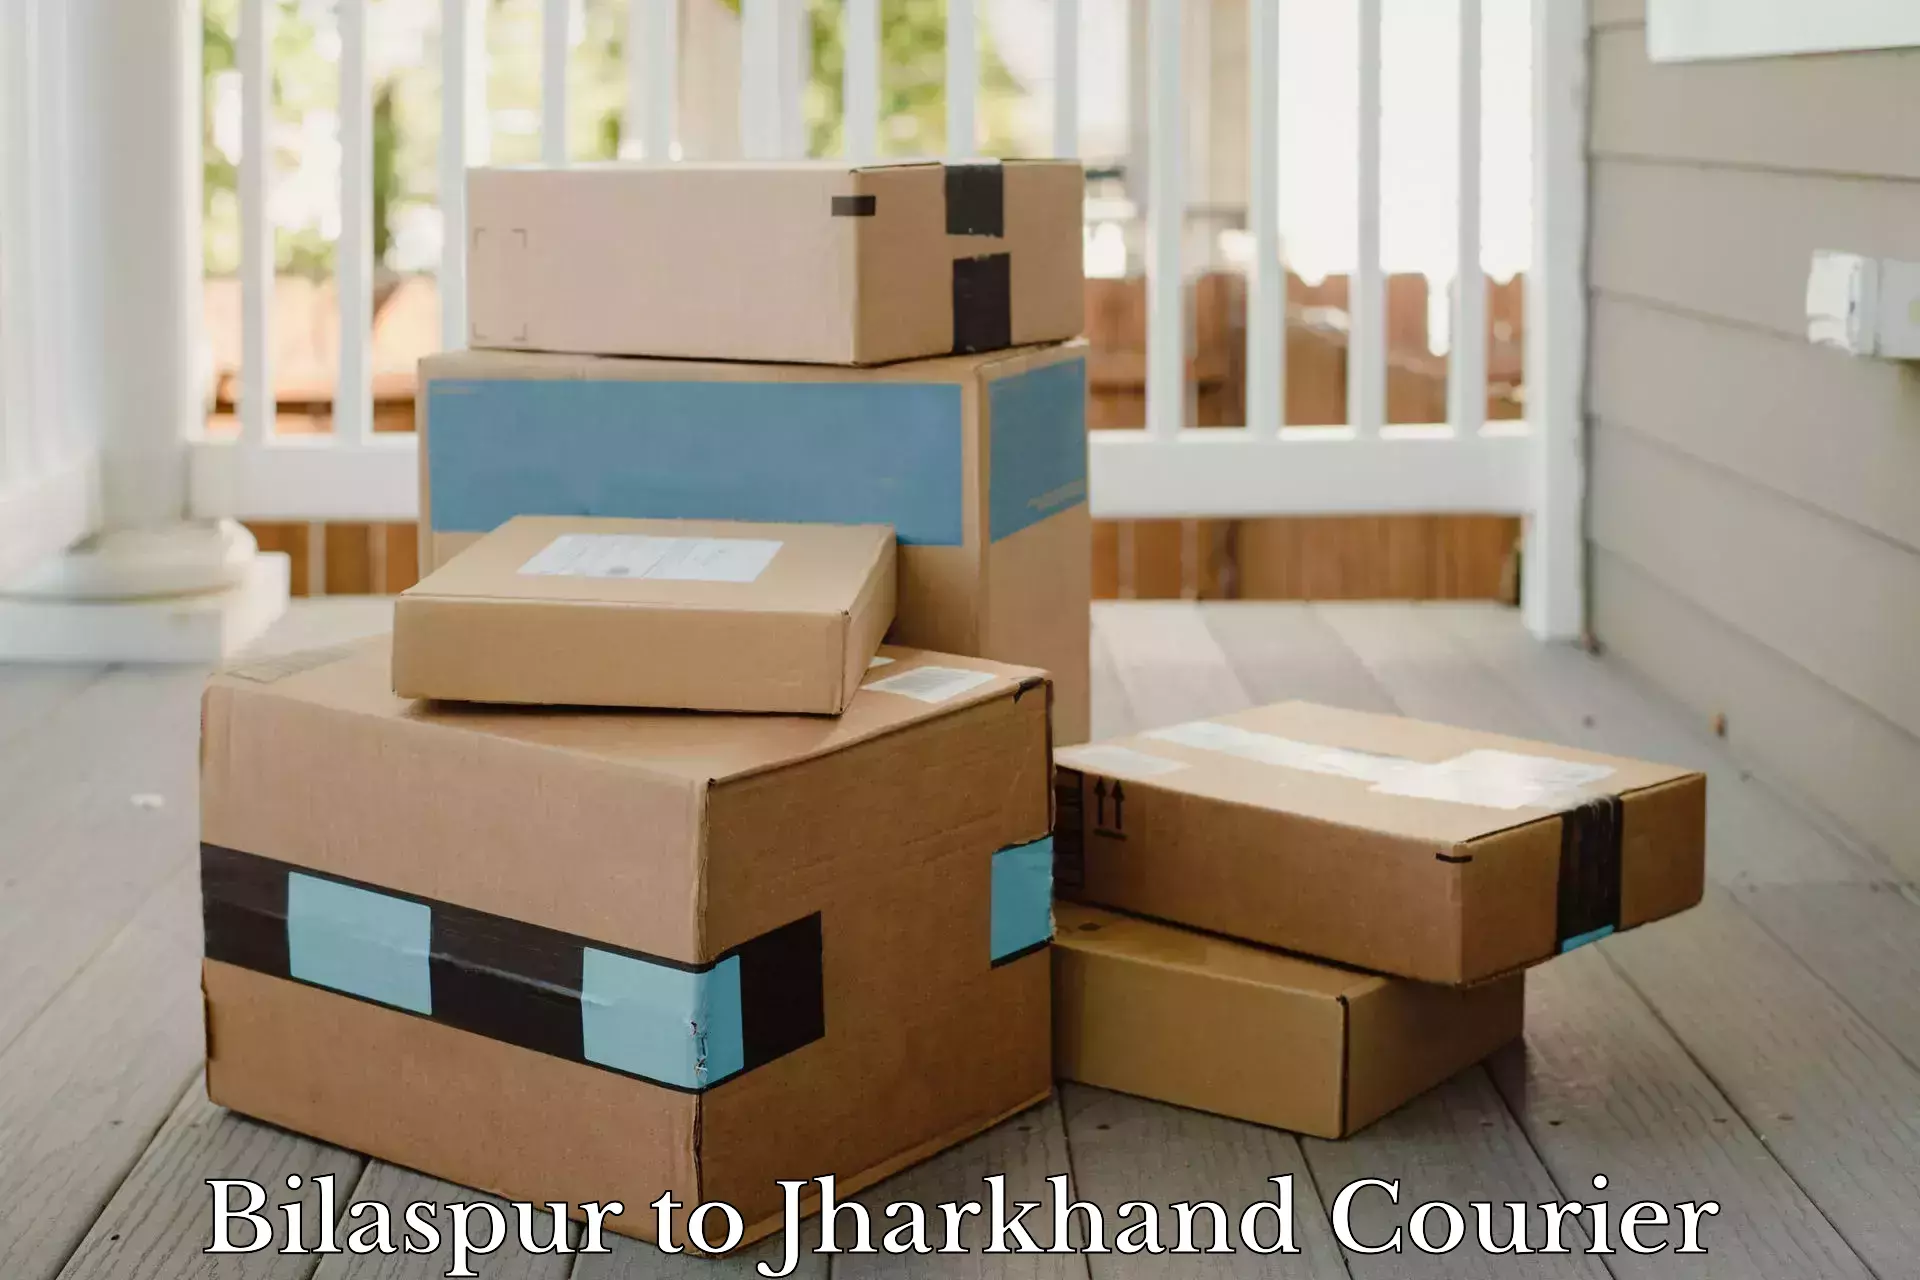 Professional courier handling Bilaspur to Jharkhand